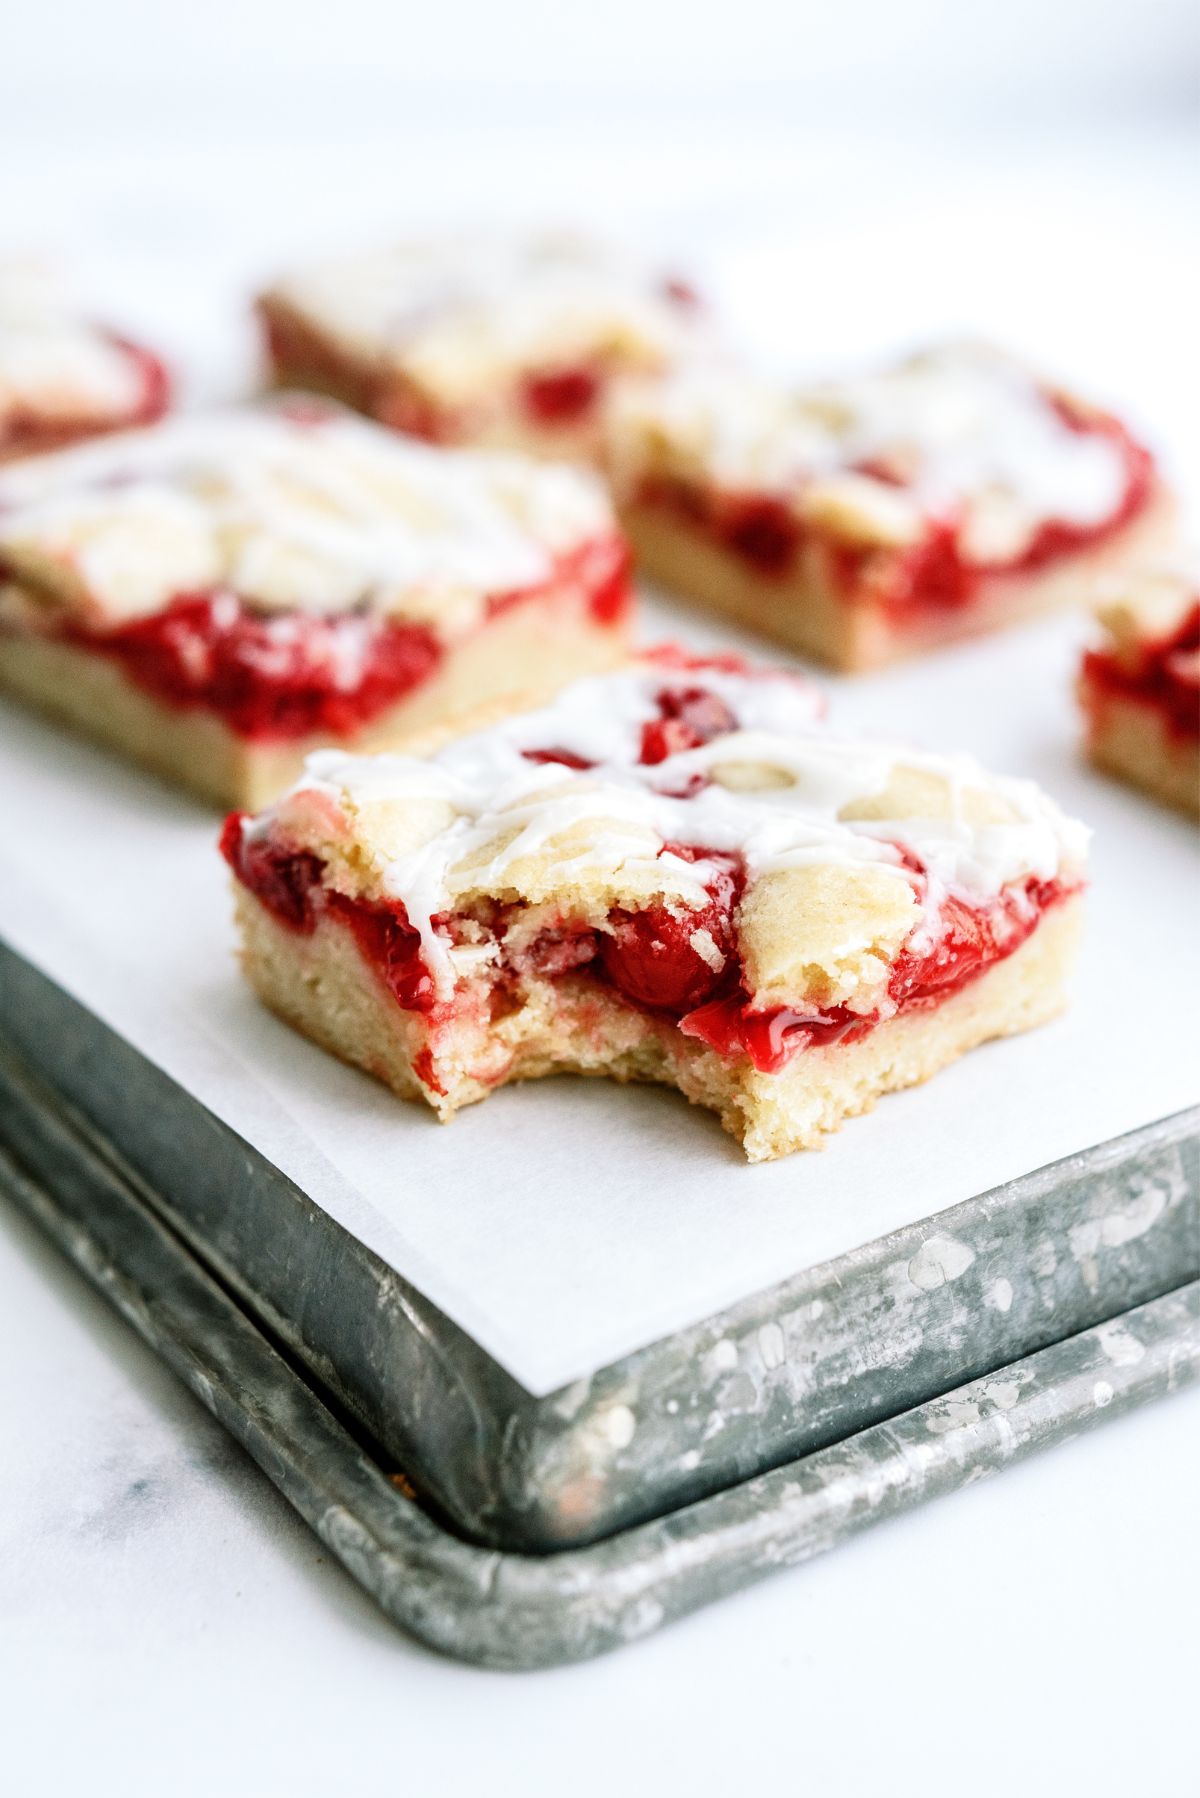 Cherry Pie Bars cut into squares with a bite missing from one bar